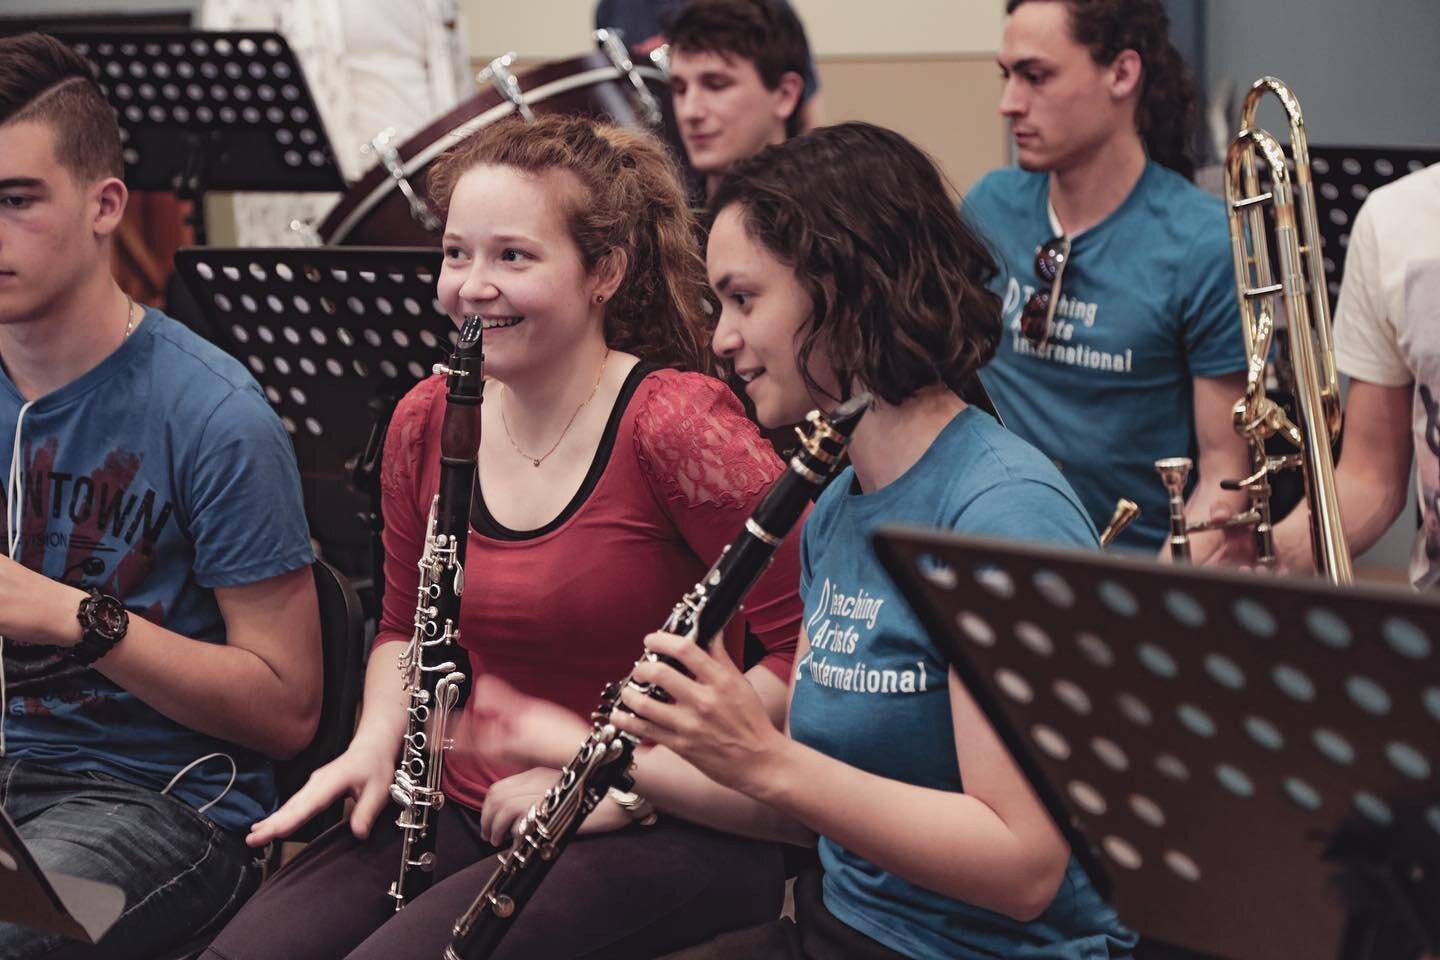 We love teaching music, we love learning music. -
-
Teaching Artists International is a music fellowship organization that gives musicians the opportunity to serve and travel while teaching music abroad. For more information about how you can get inv